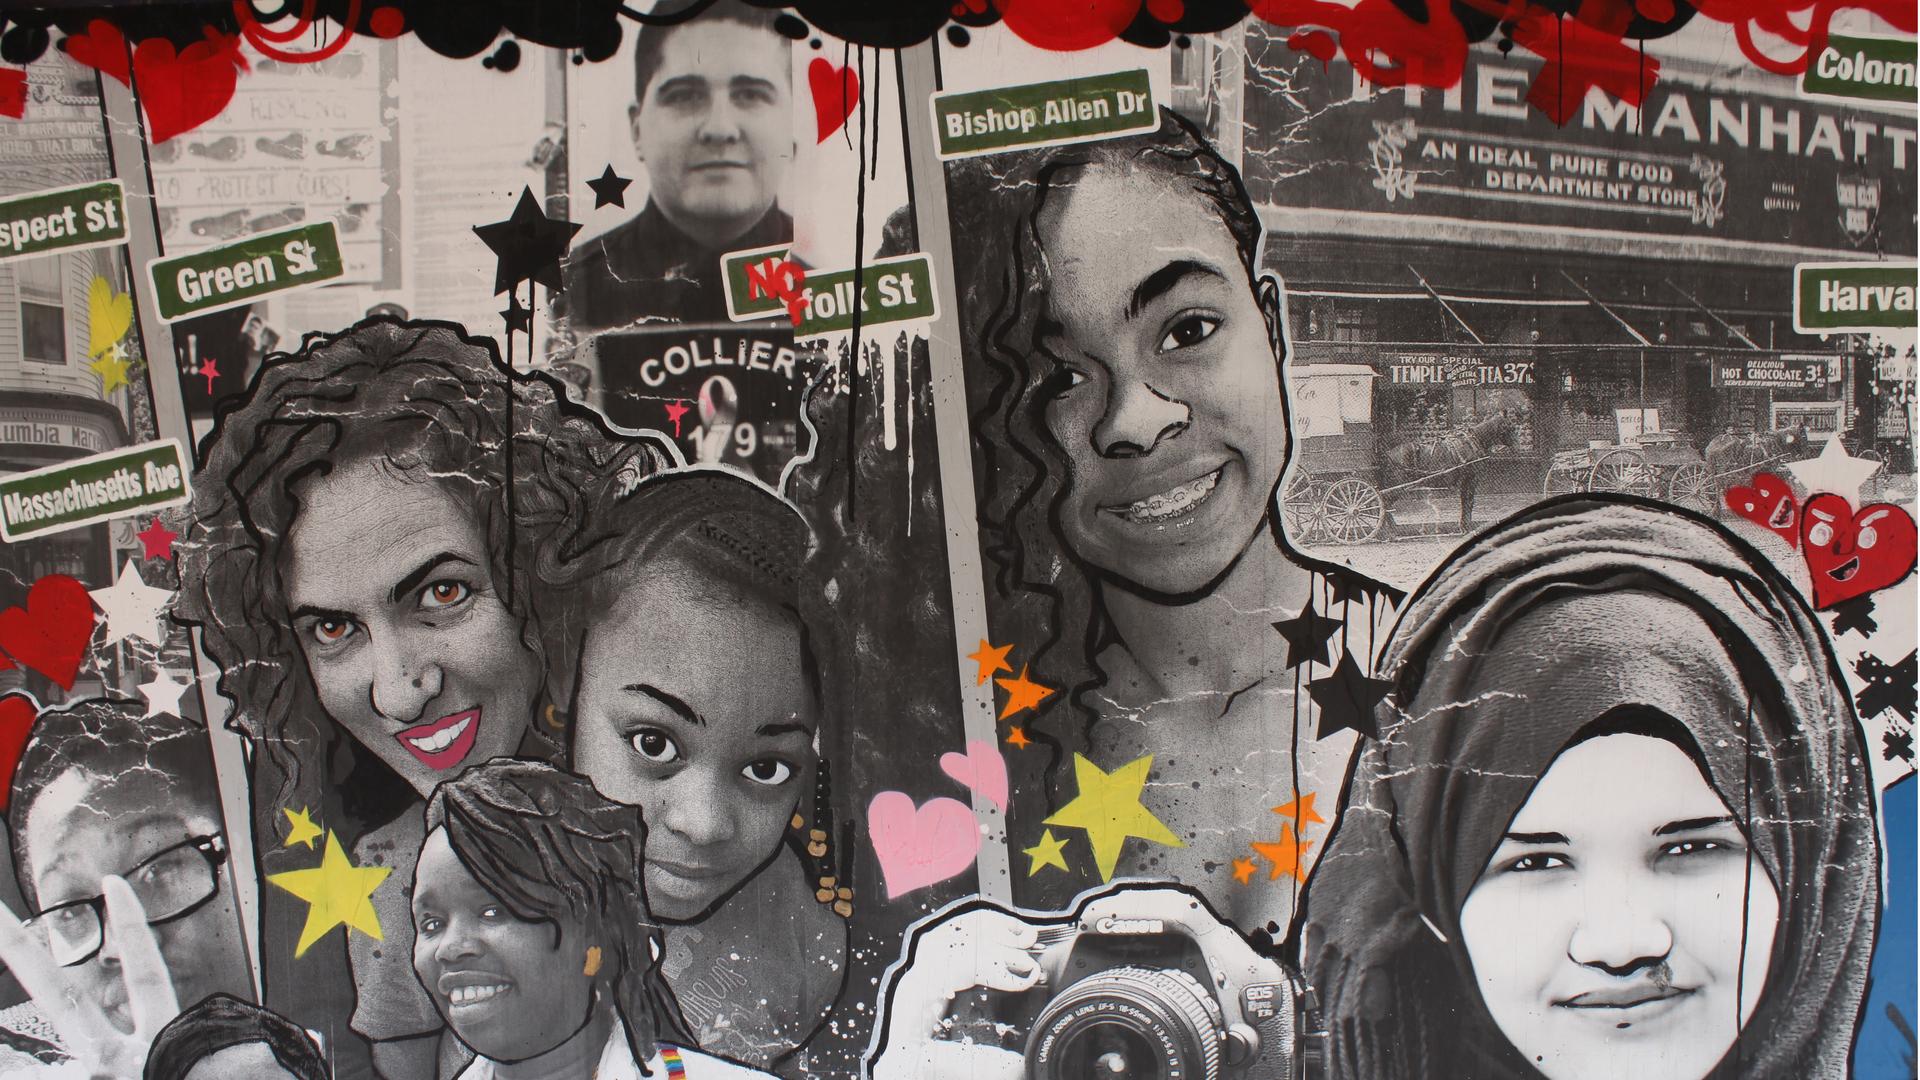 A mural by students from the Community Arts Center in Cambridge celebrates their city and pays tribute to slain MIT police officer Sean Collier, killed in the aftermath of the Boston Marathon bombings in April 2013.